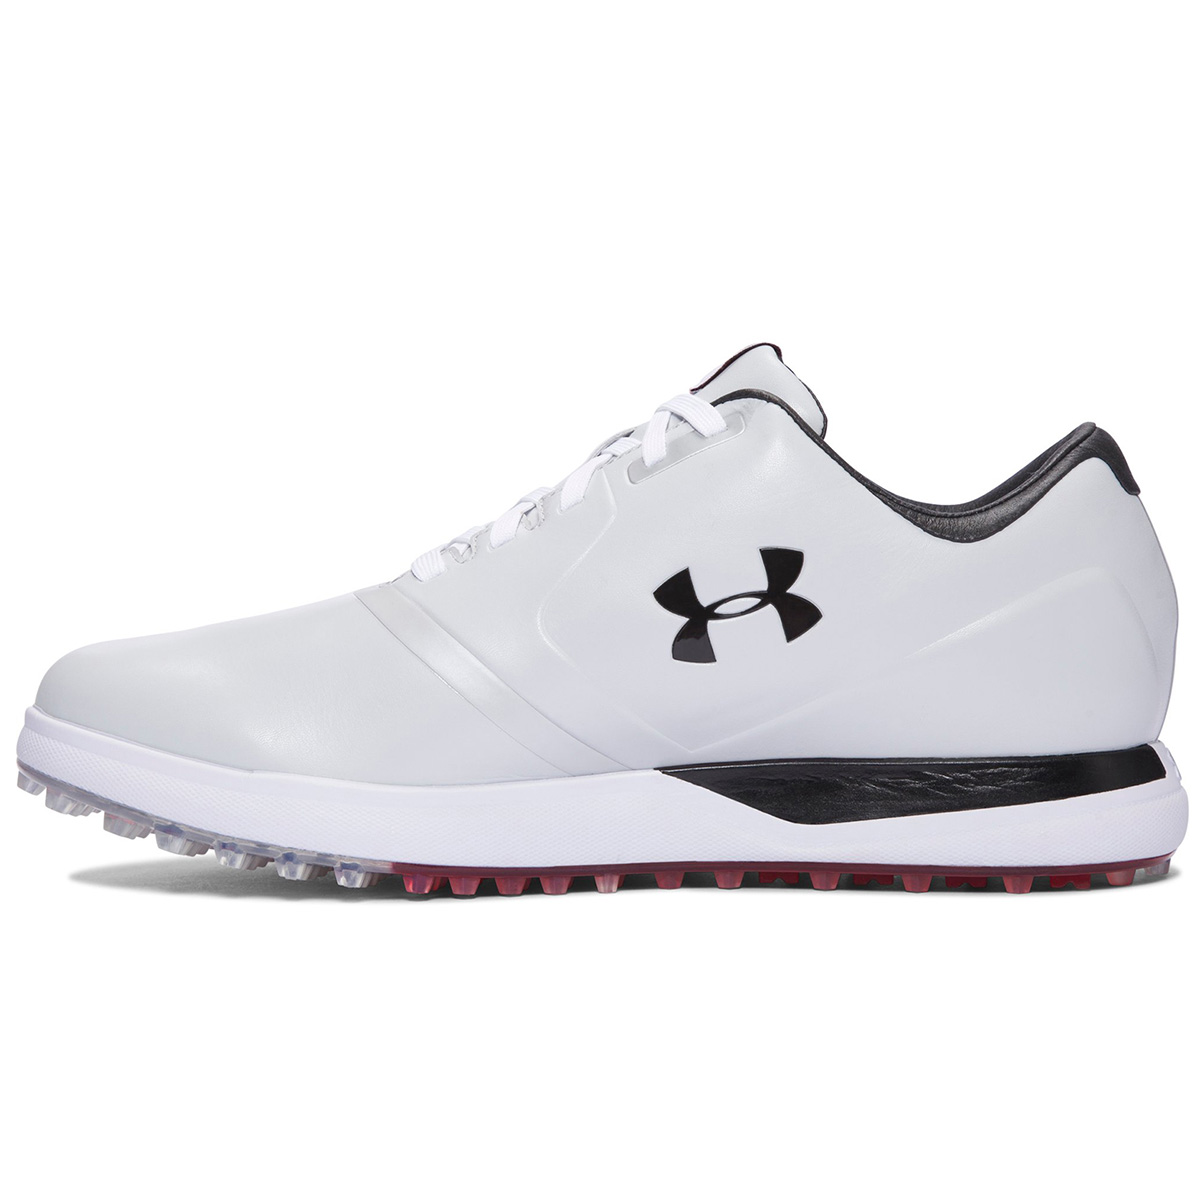 Under Armour Performance Spikeless Shoes from american golf